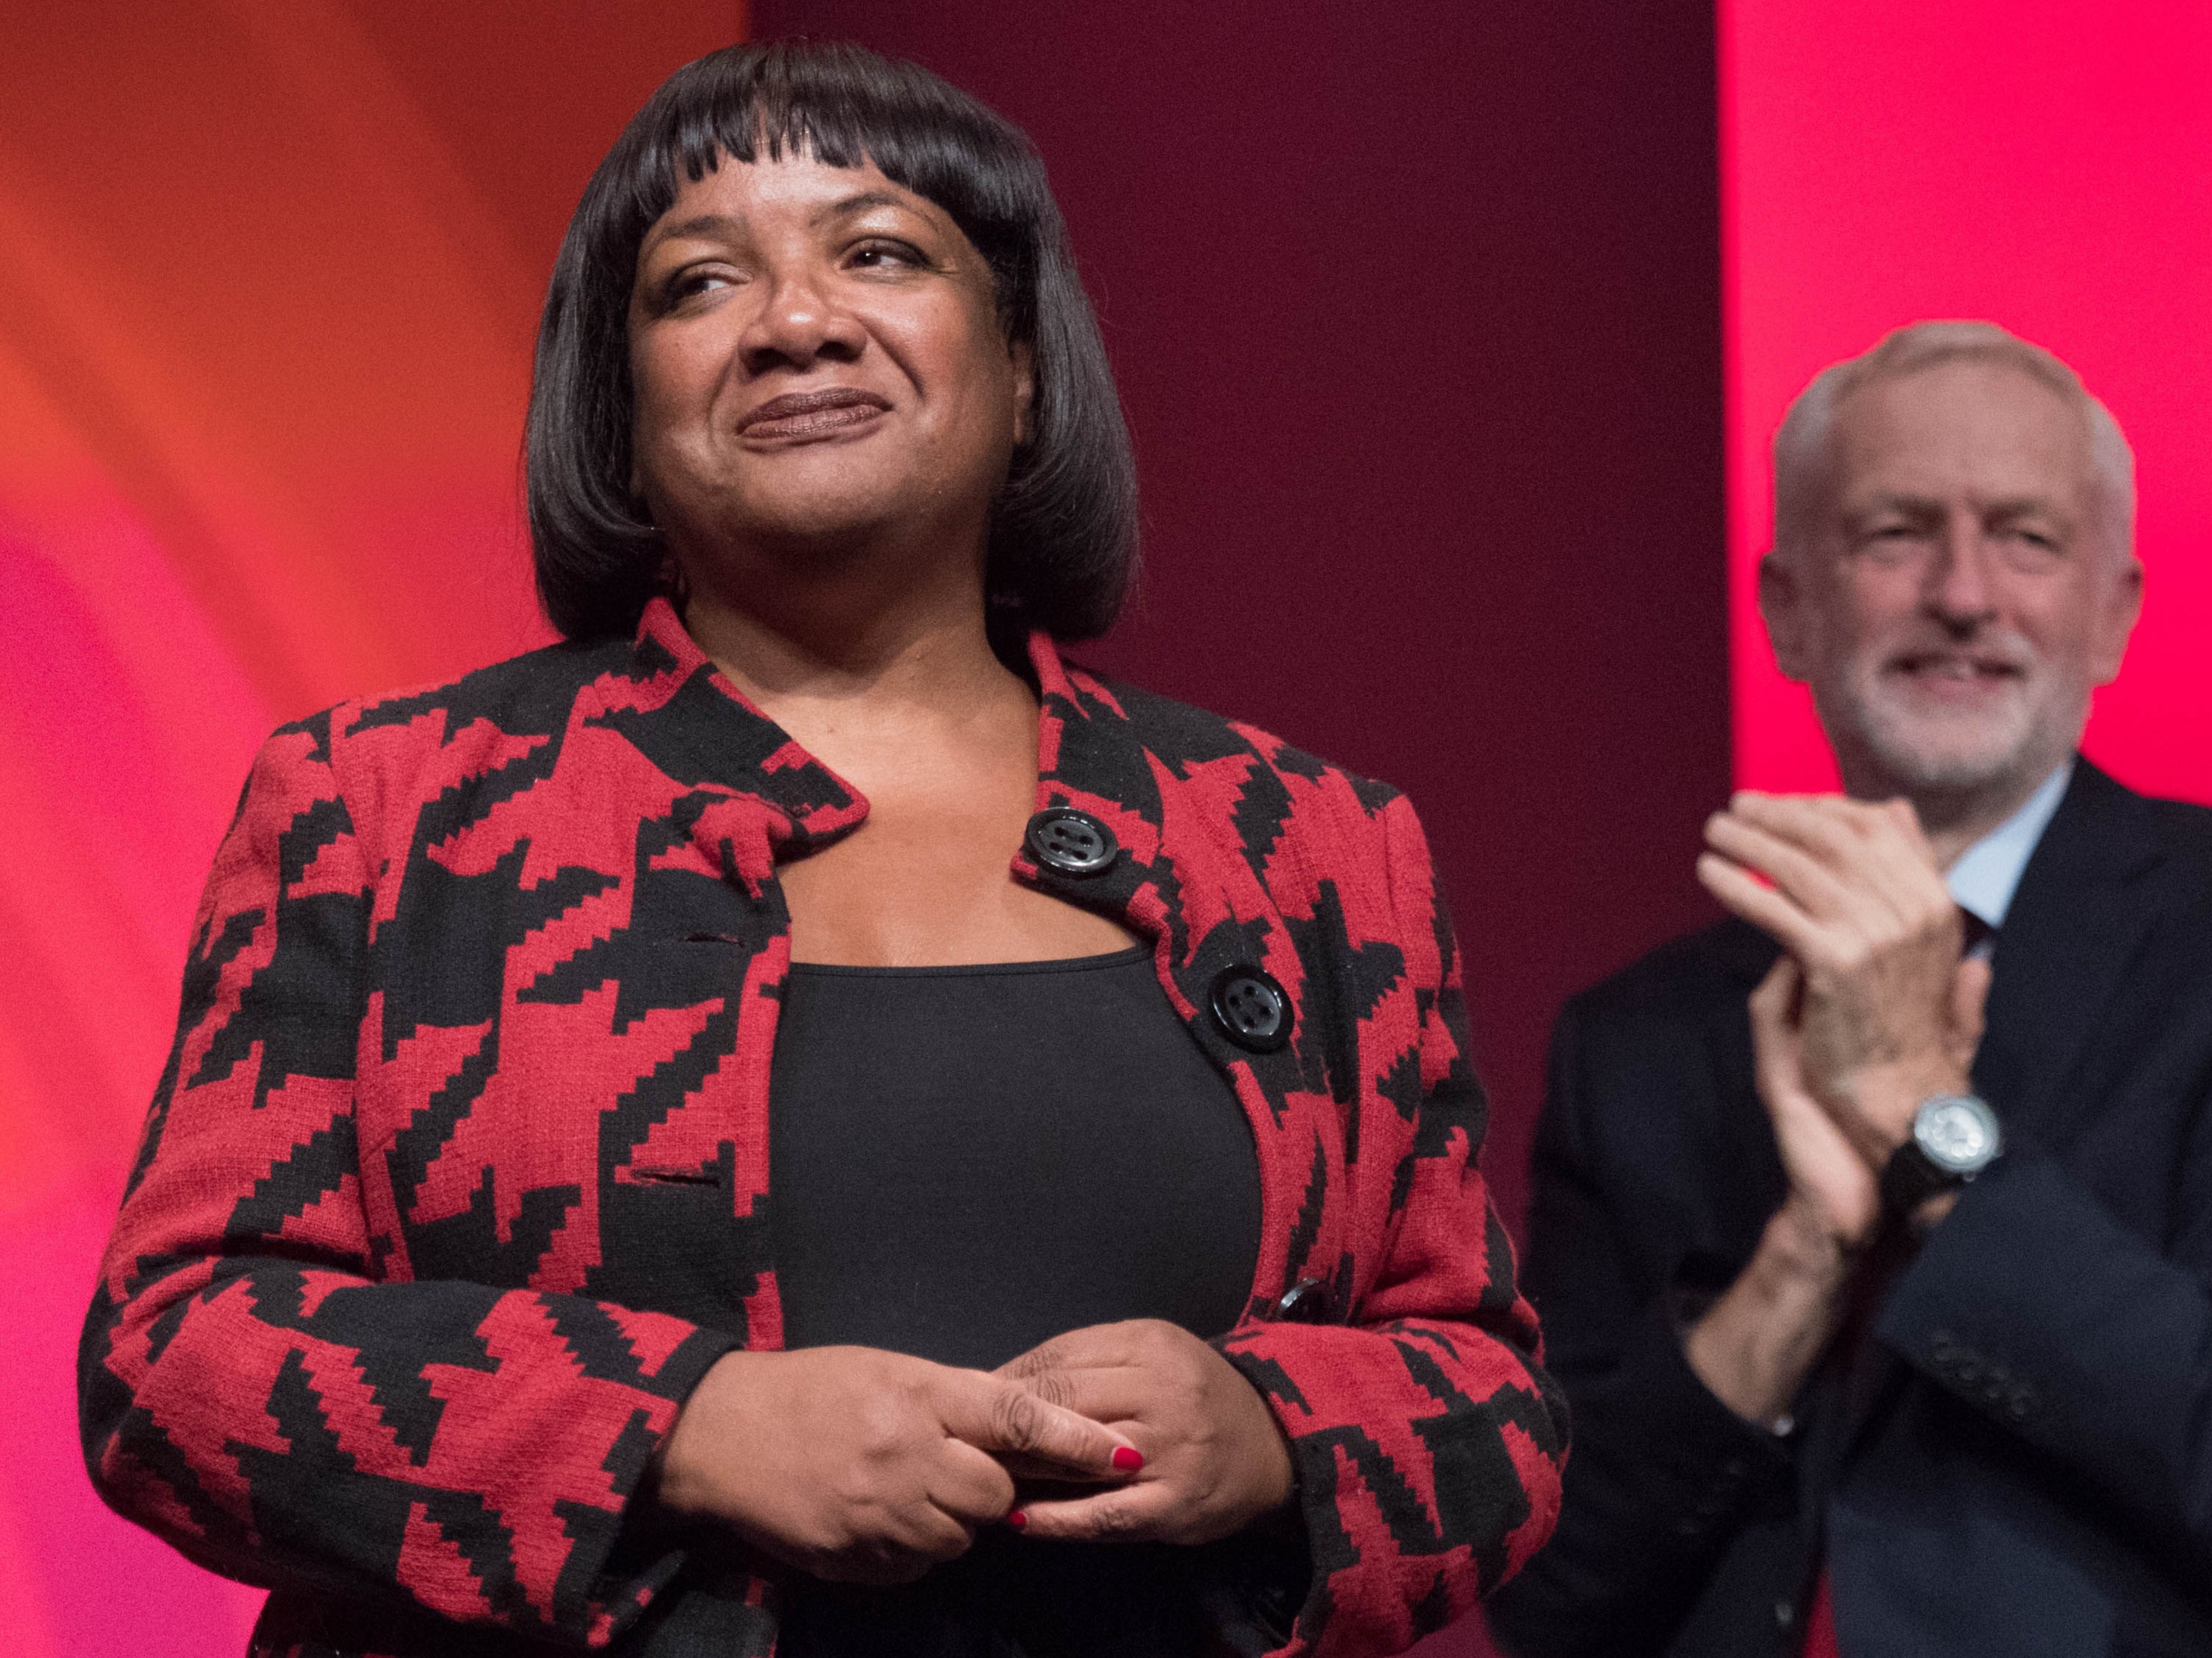 Diane Abbott, a stalwart of Labour’s Jeremy Corbyn years, was suspended from the parliamentary party after suggesting Jewish people do not face racism